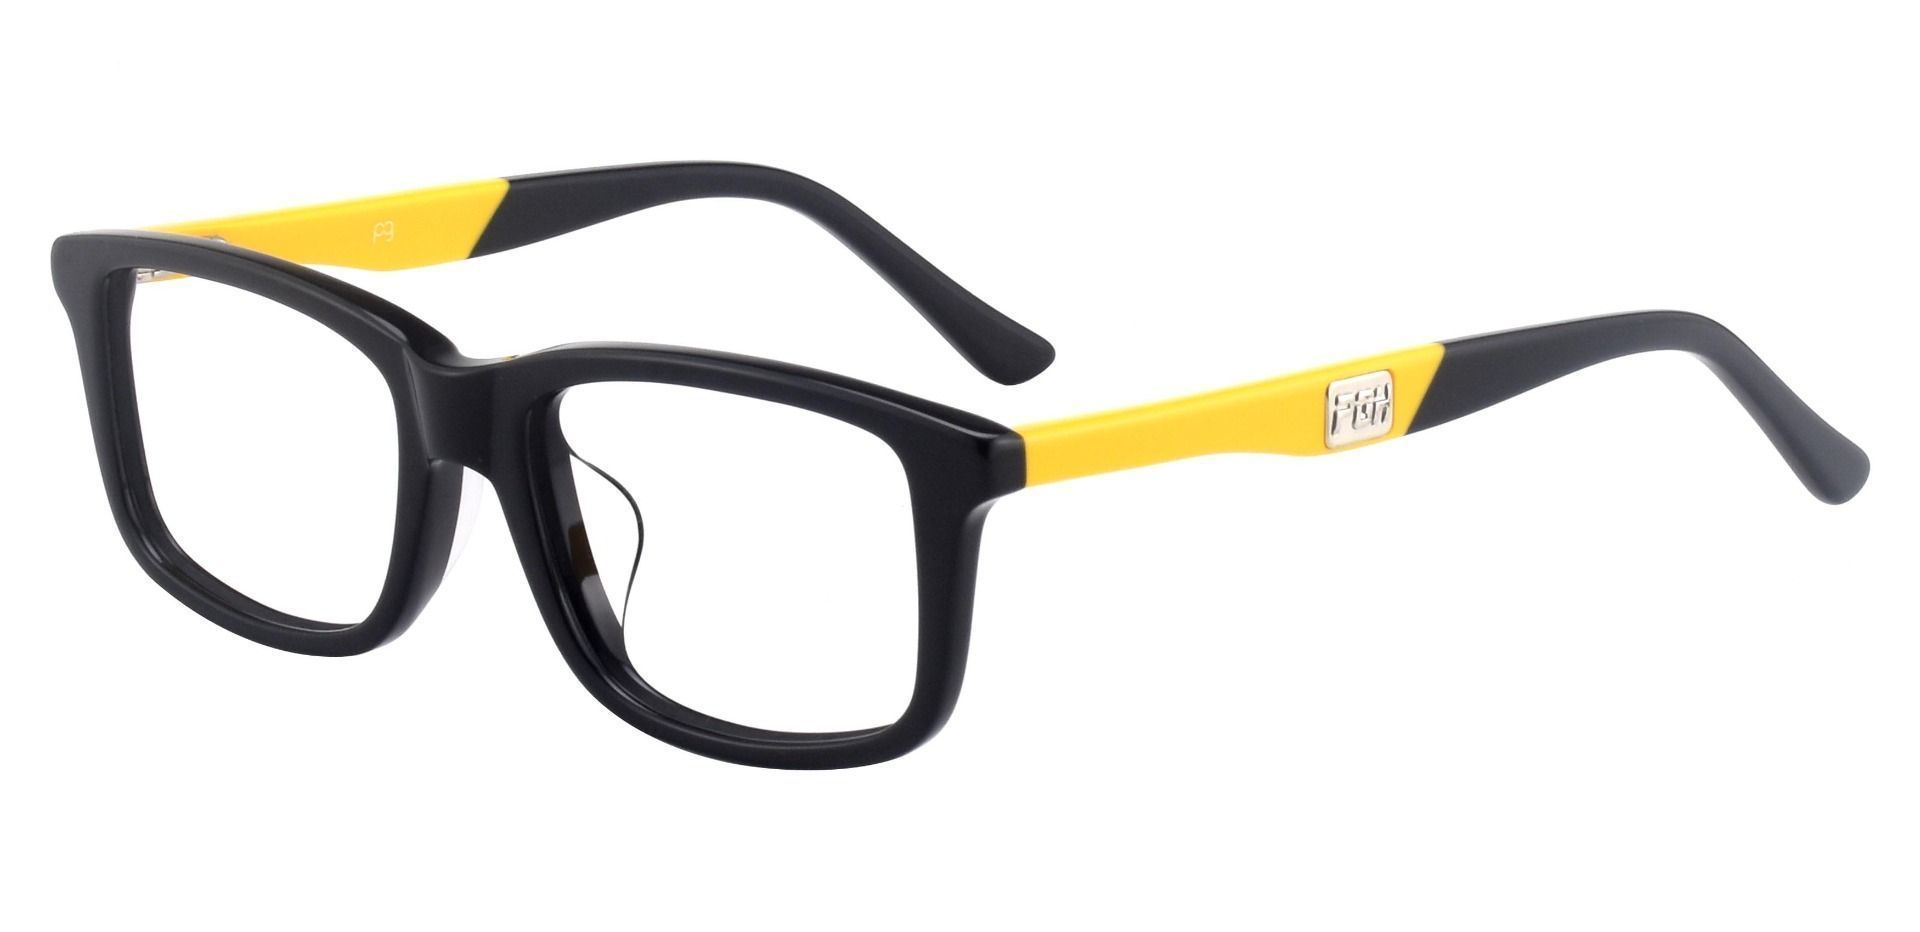 Allegheny Rectangle Reading Glasses - Black-yellow